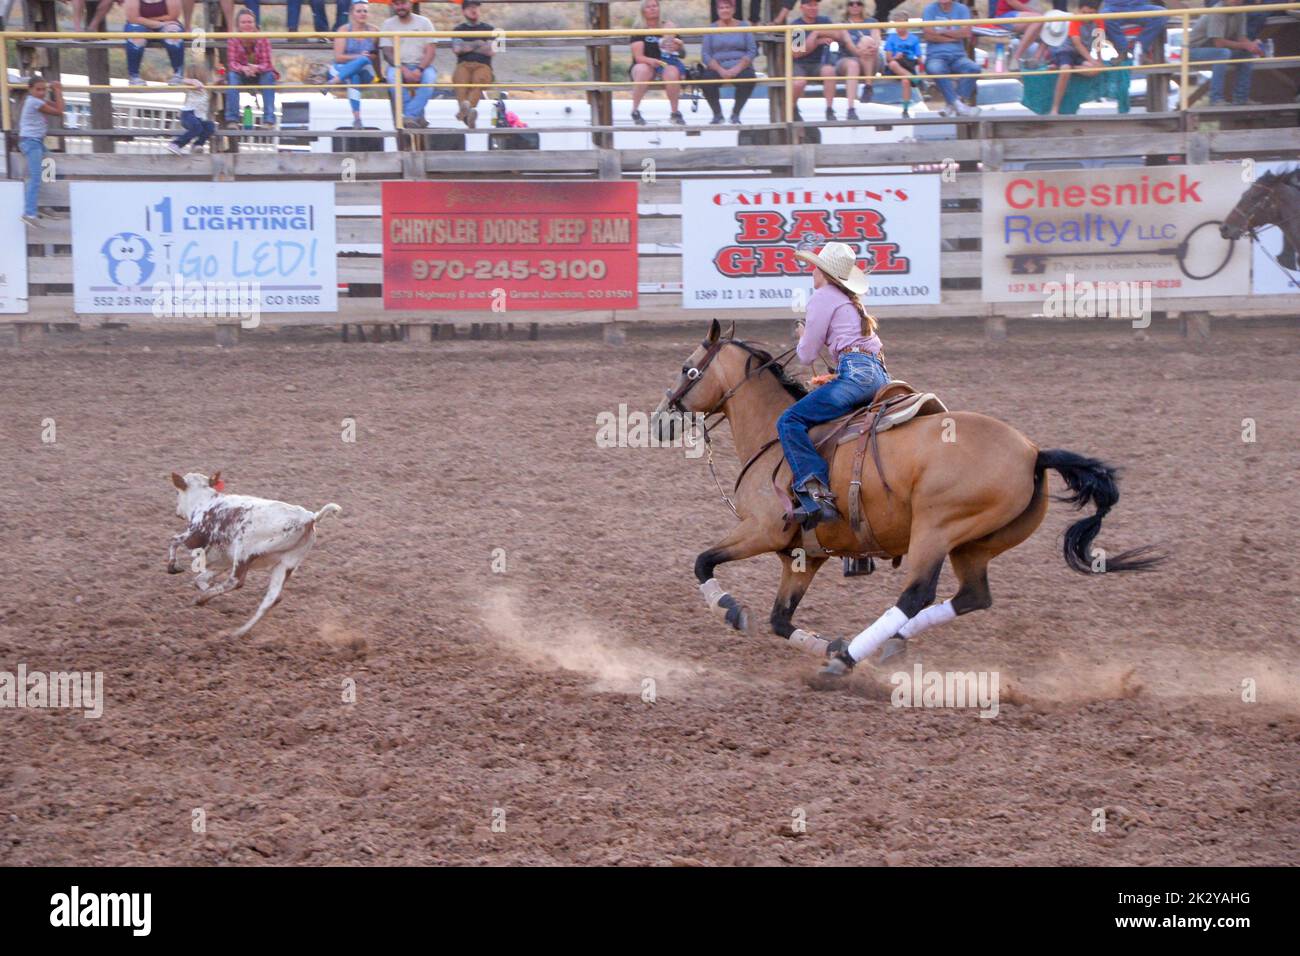 A cowgirl on a bay horse chases a young steer at a Rodeo event in Fruita Colorado USA Stock Photo